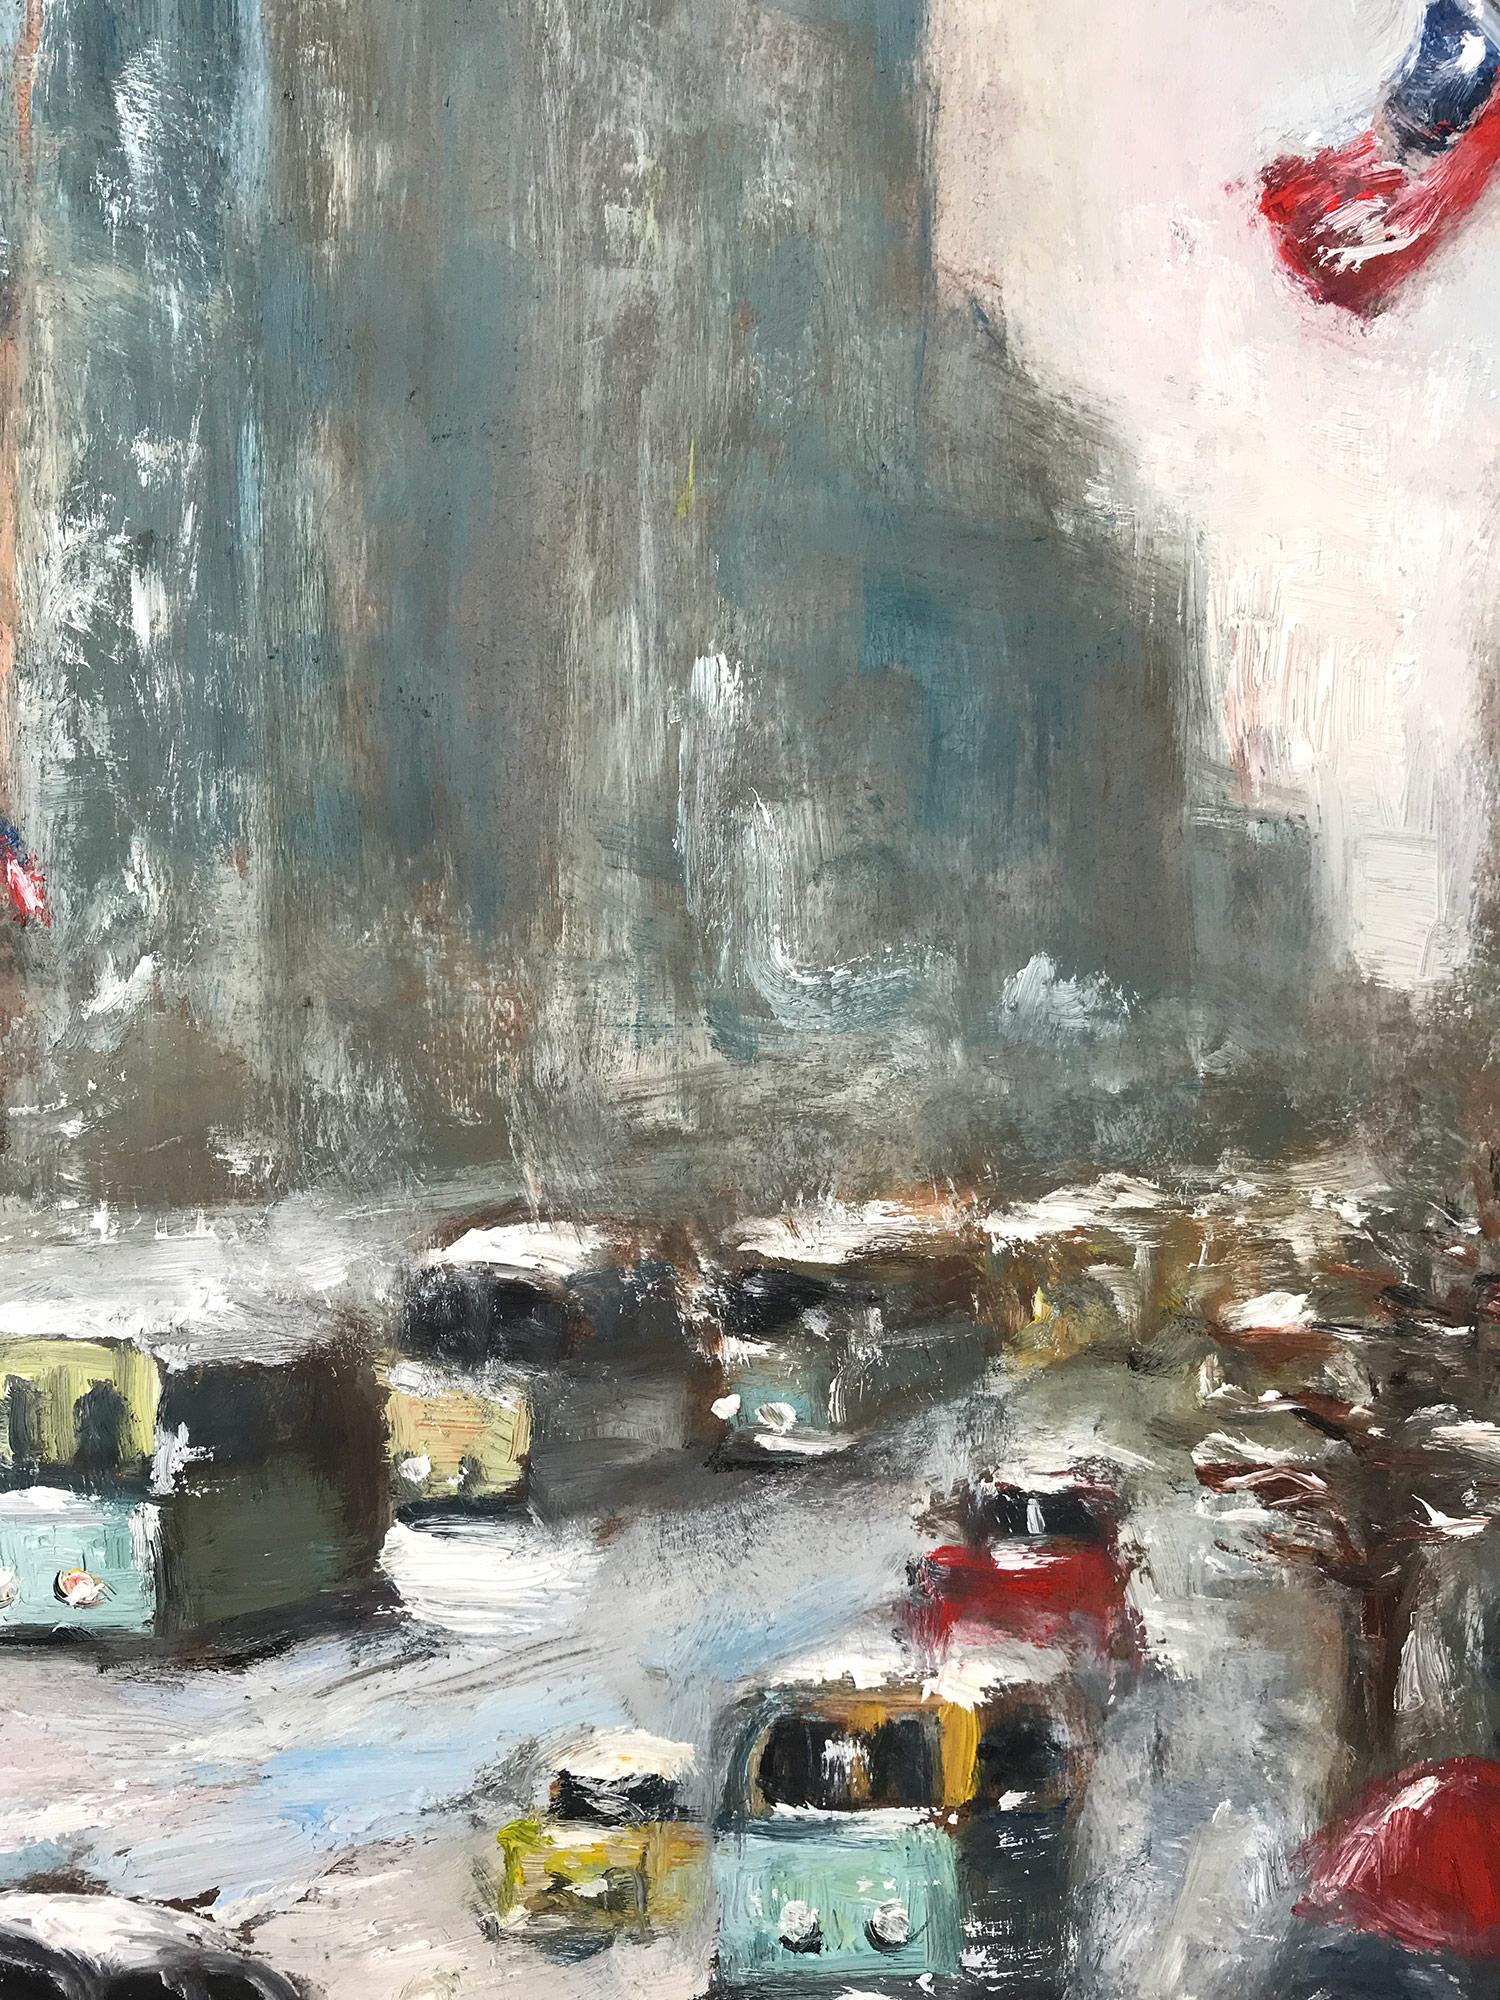 Snow in Downtown Wall Street, Impressionist Street Scene in style of Guy Wiggins - American Impressionist Painting by Cindy Shaoul